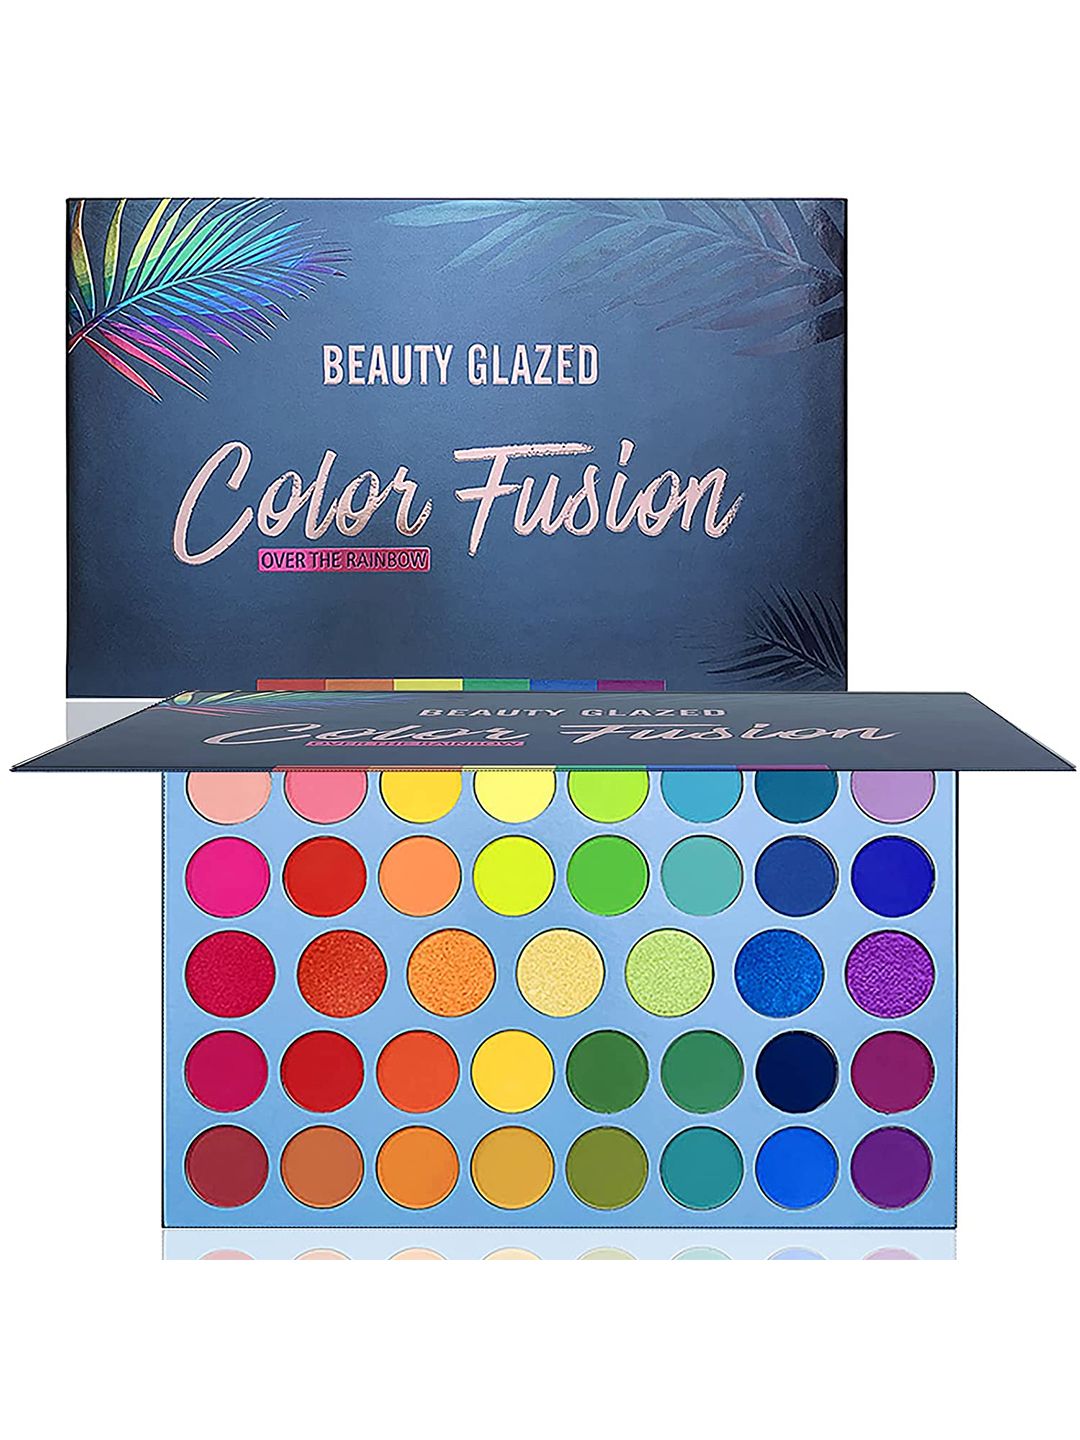 BEAUTY GLAZED Color Fusion 39 Shades Eyeshadow Palette - Over The Rainbow Price in India